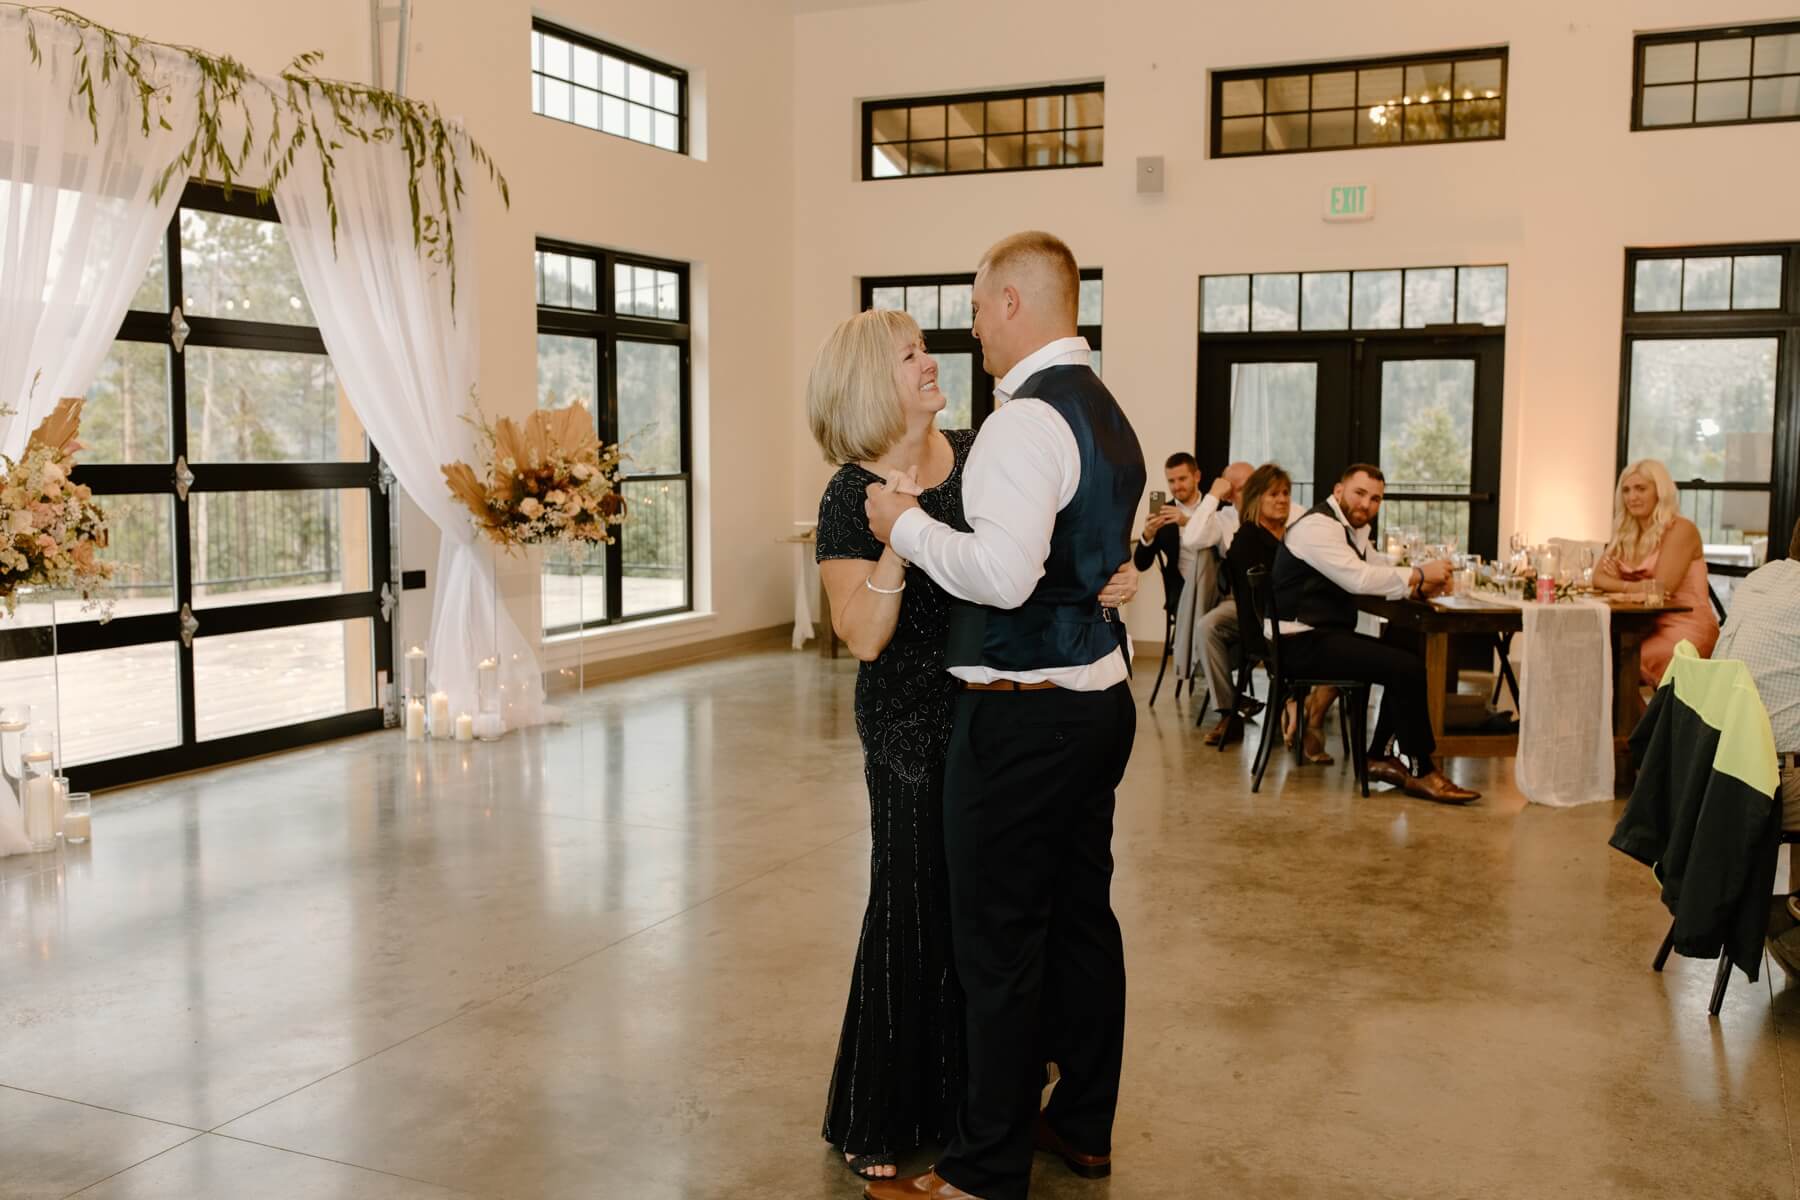 Groom dancing with mom during reception at idaho springs wedding venue | McArthur Weddings and Events